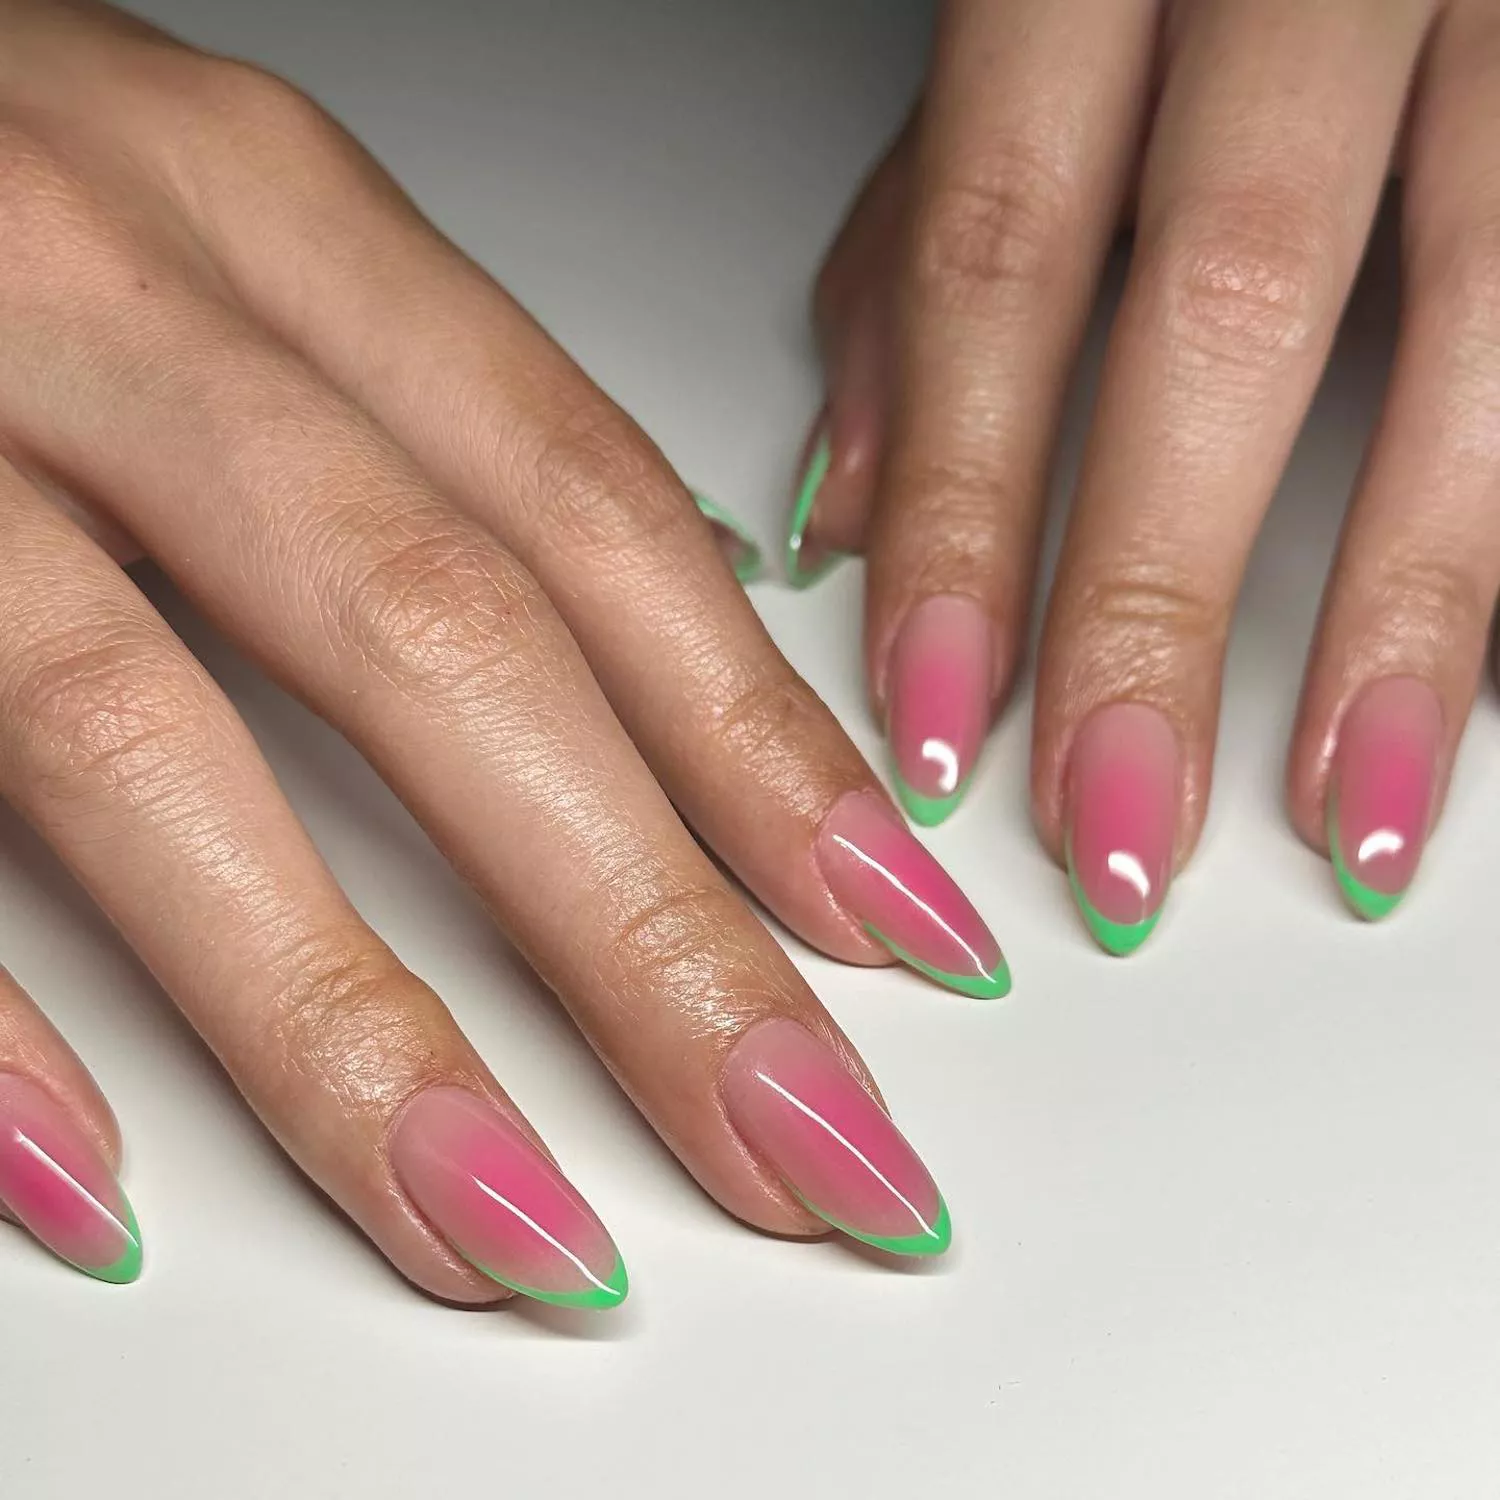 Manicure with watermelon pink airbrushed base and lime green French tips